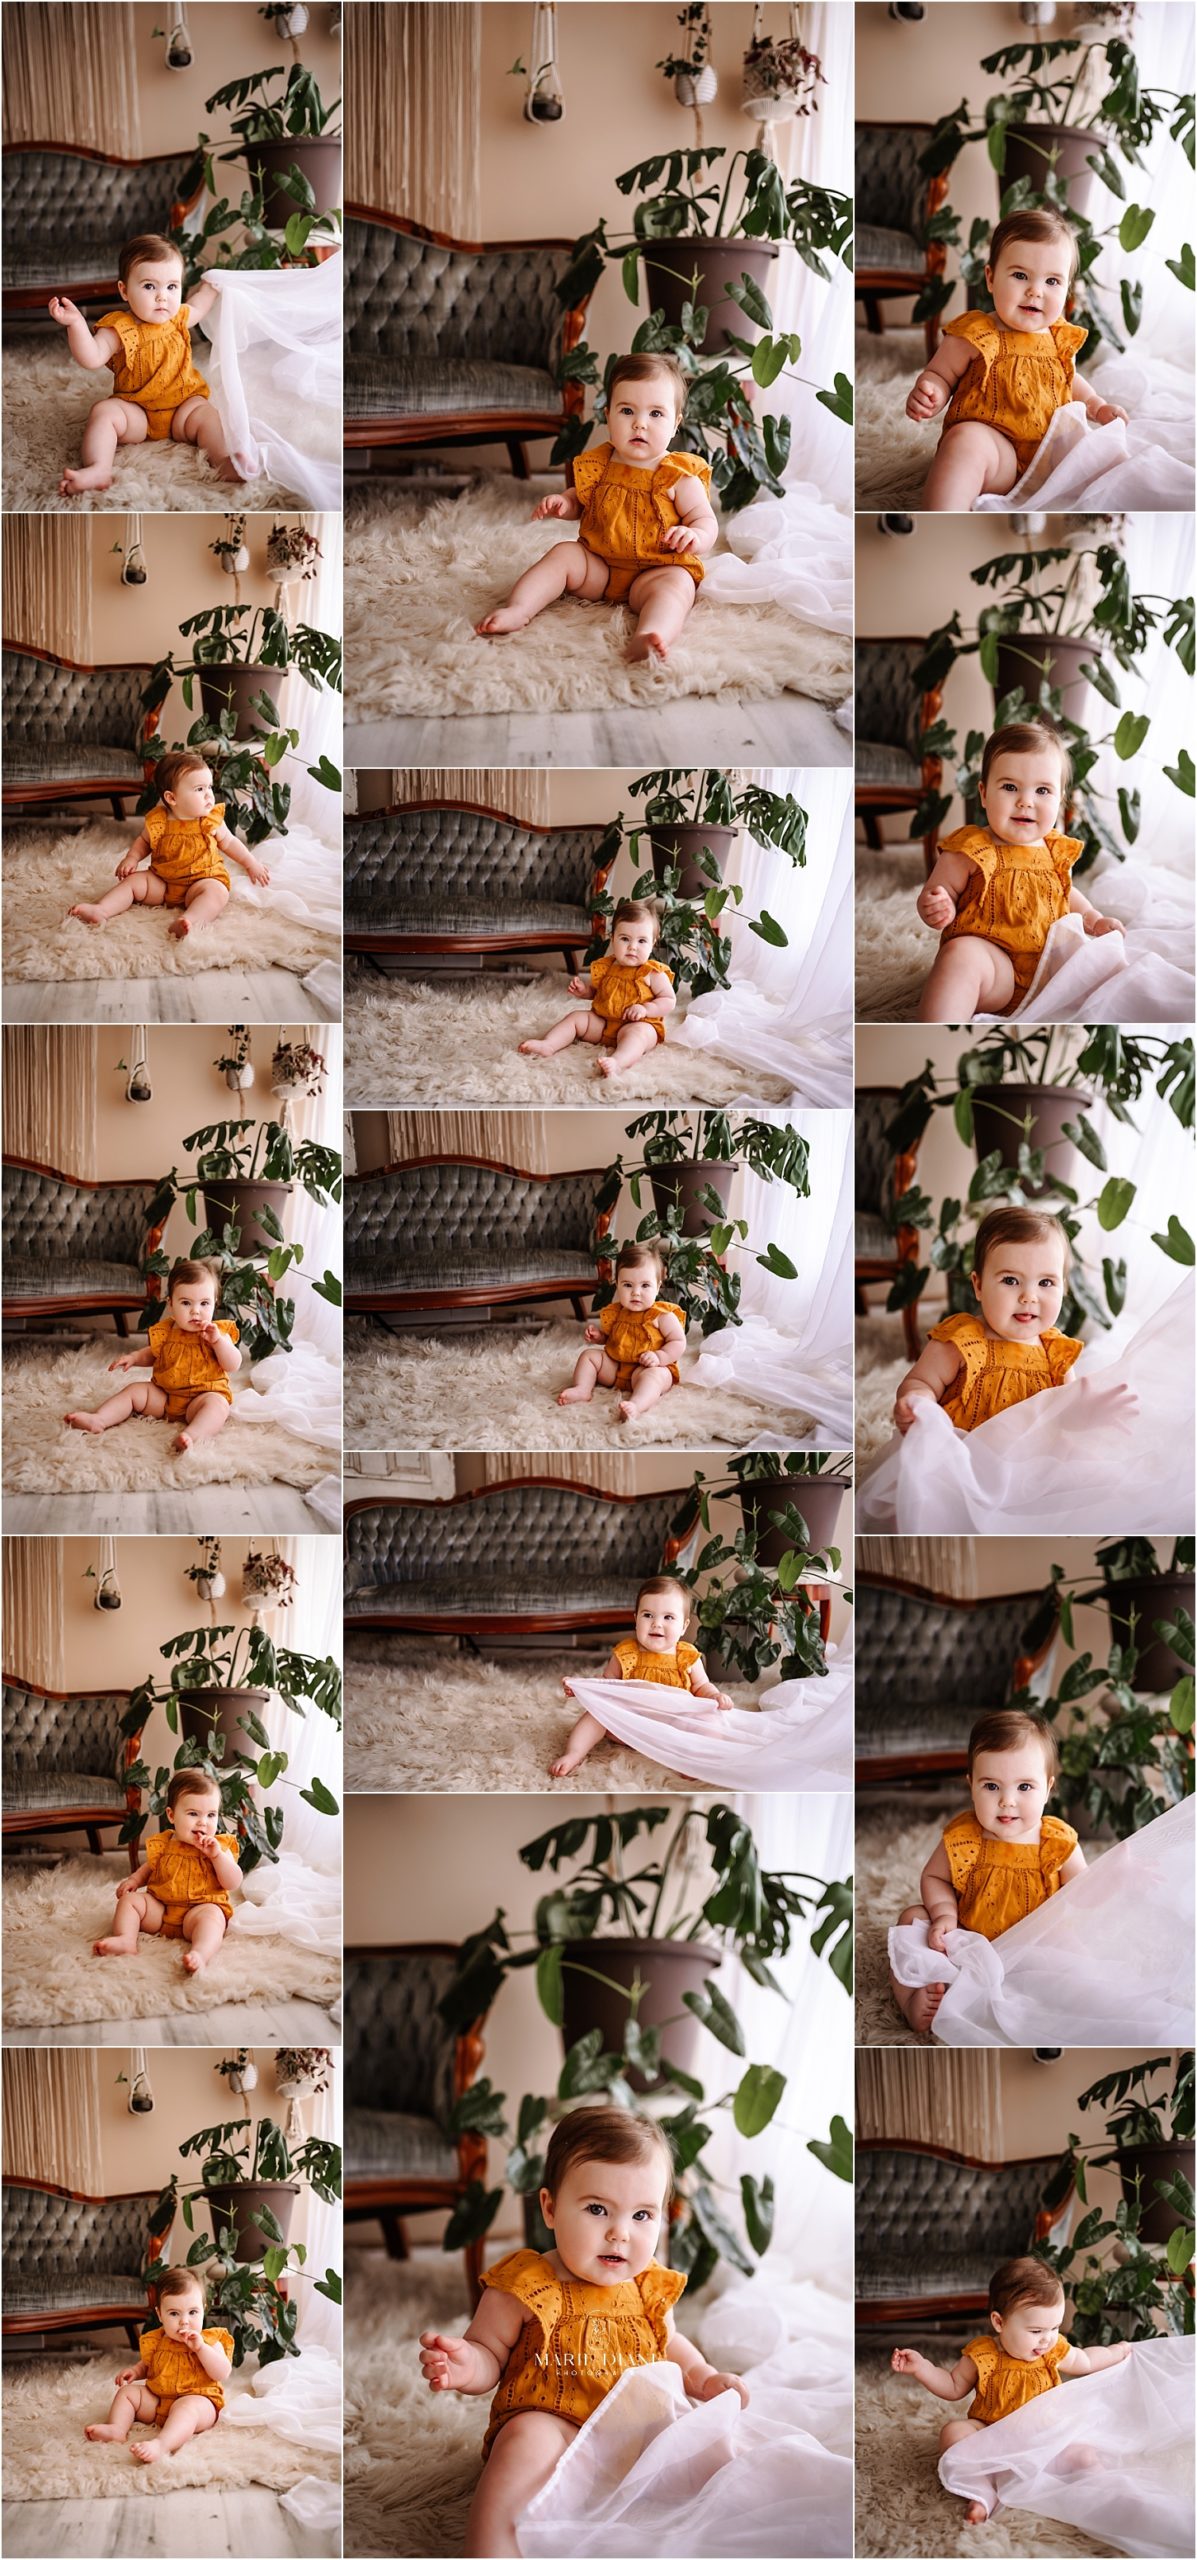 8 month girl sitting on floor in front of couch and plants in neutral colored room 